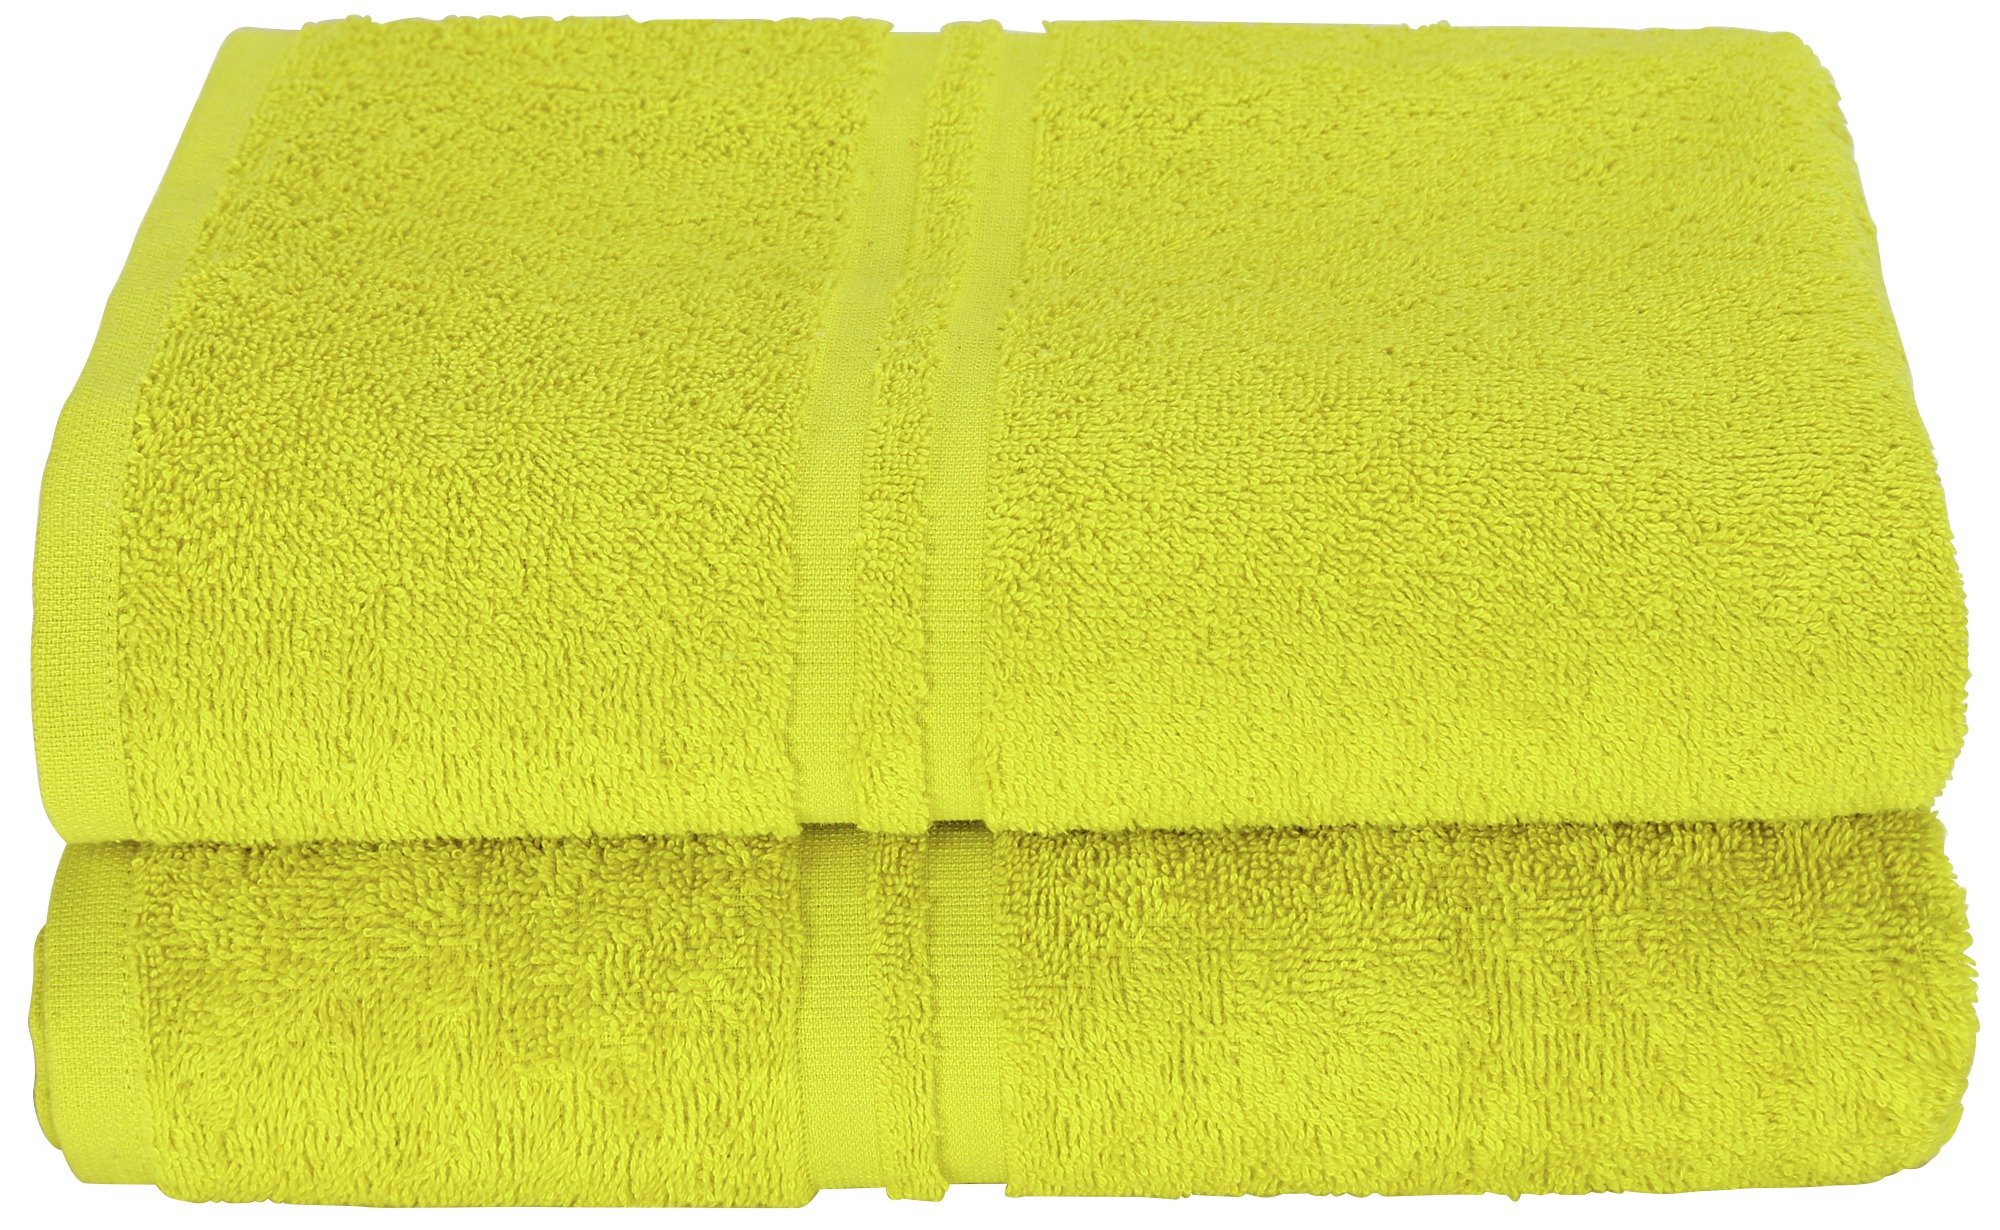 ColourMatch by Argos Pair of Bath Towels review